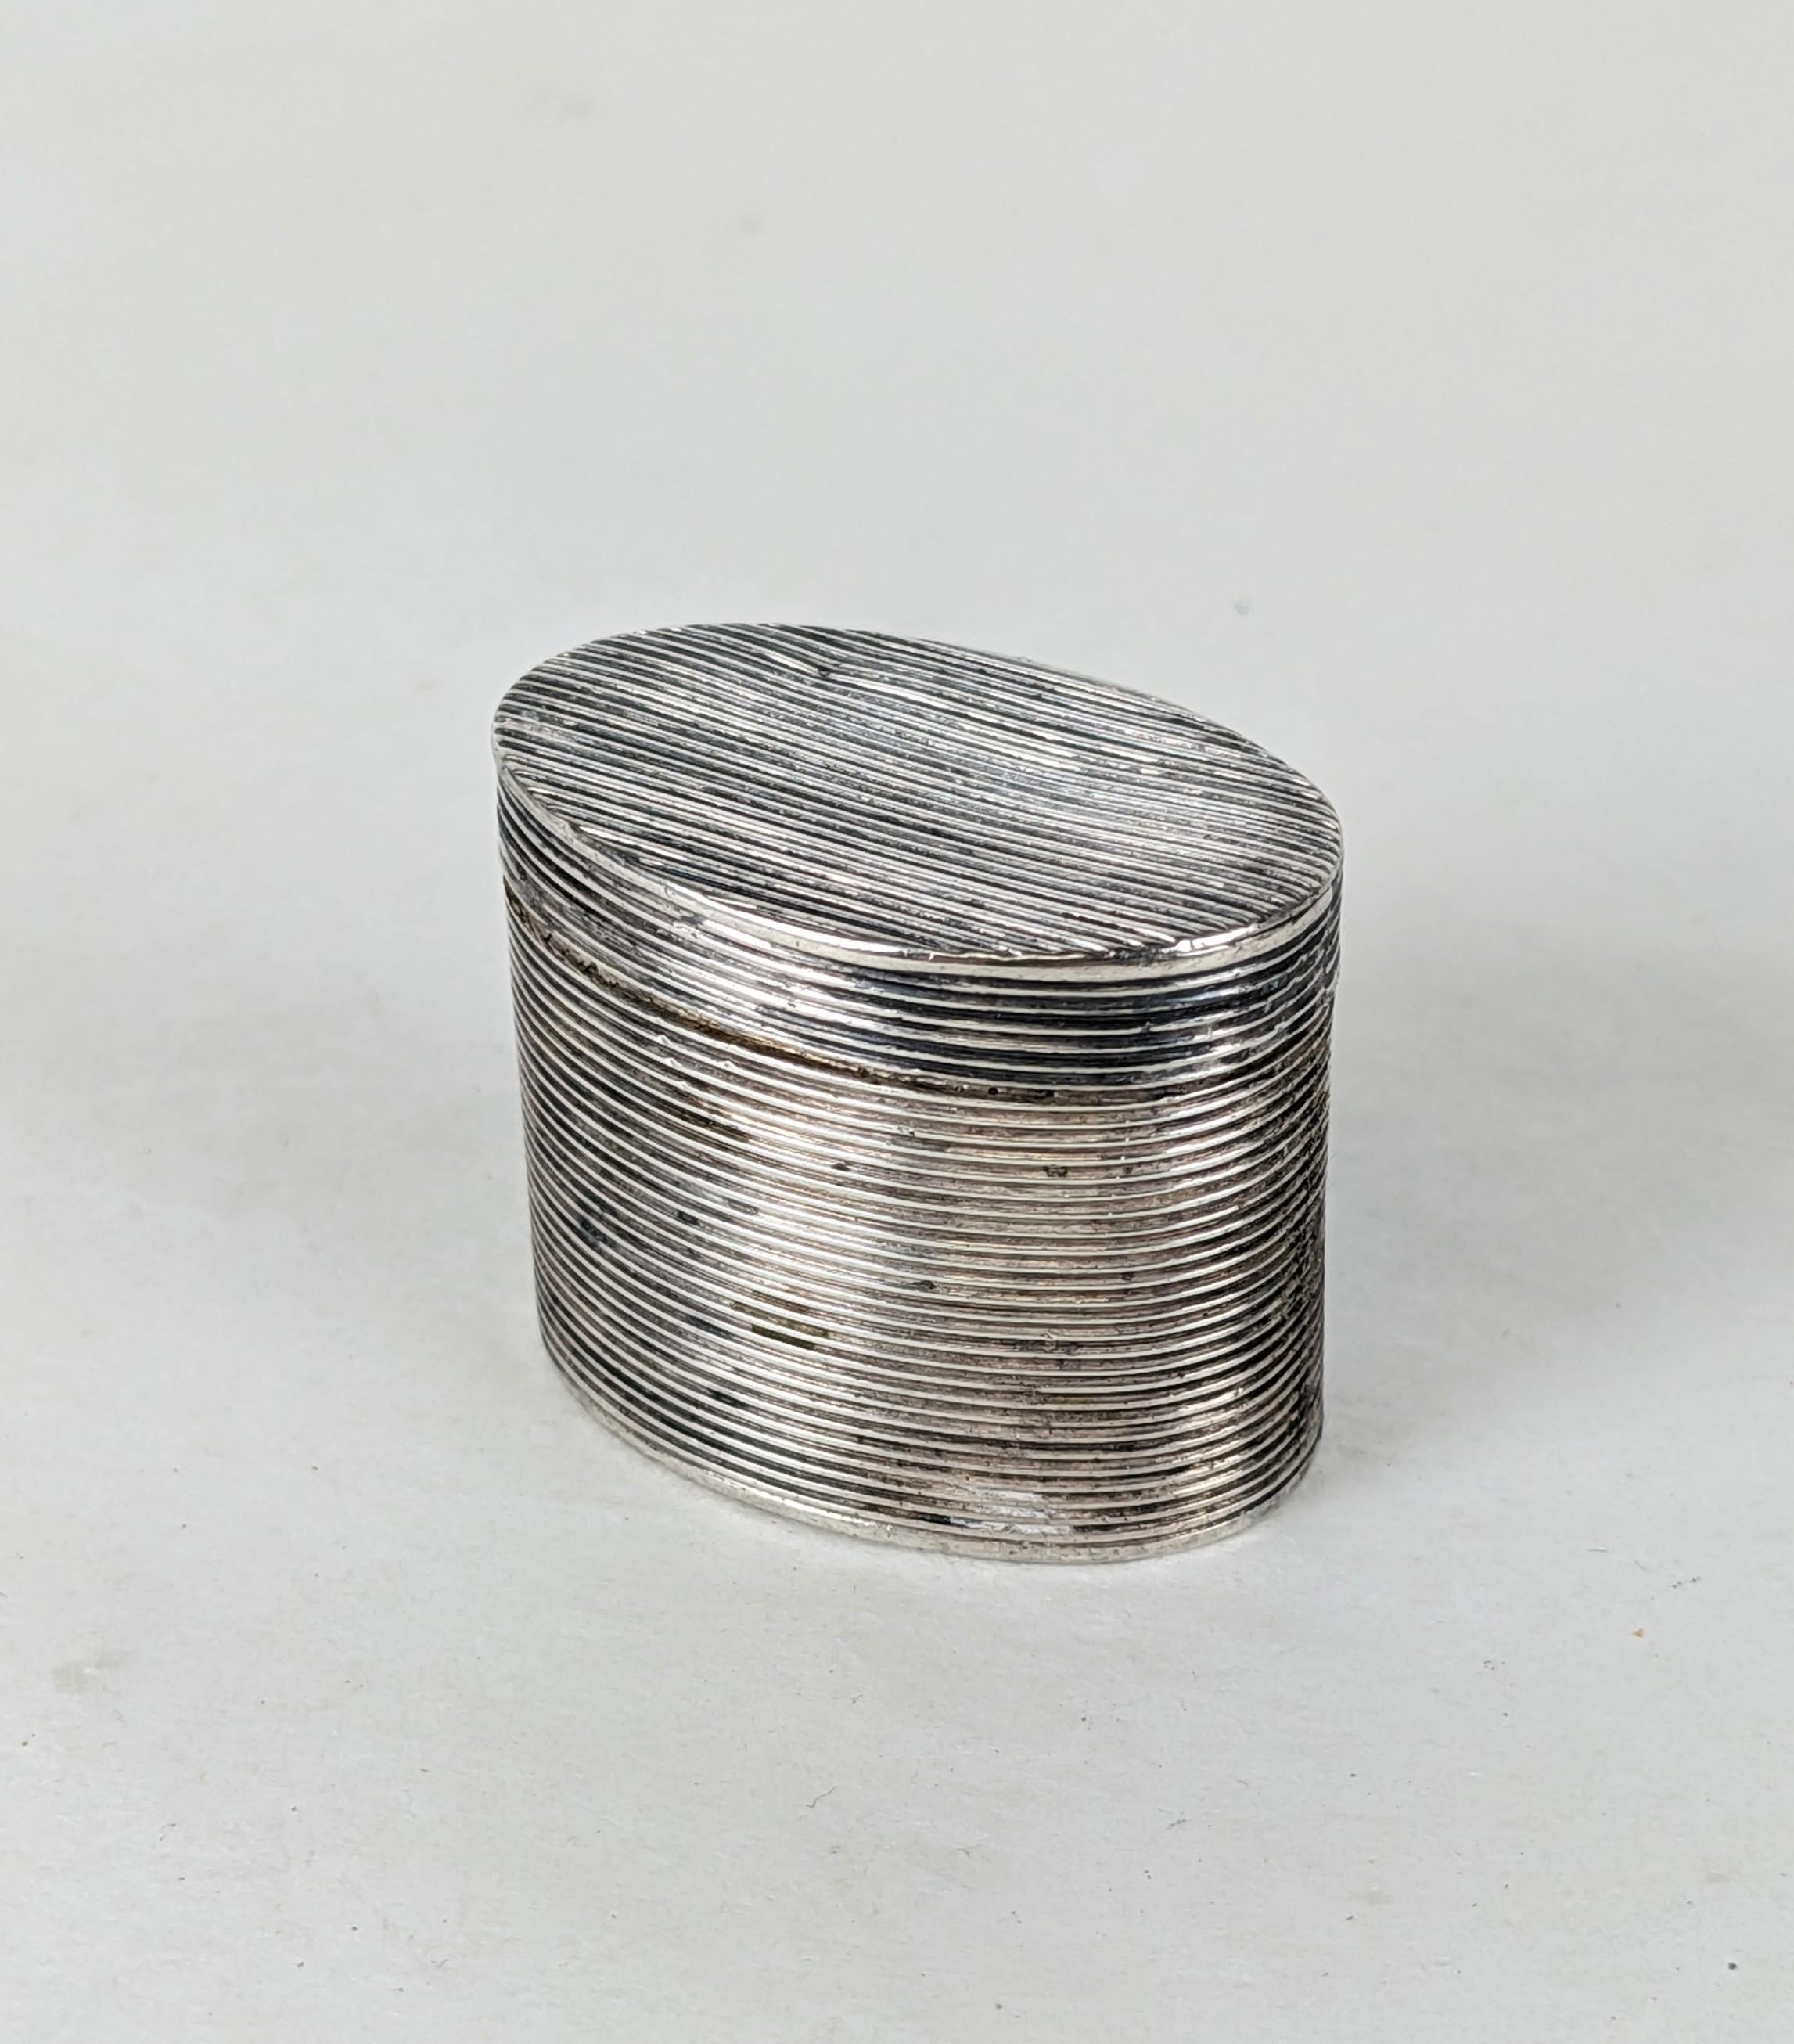 Elegant 19th Century Ribbed Silver Pill Box handmade of coin silver. Simple reeded silver is used for simple oval handmade box. 
1.25